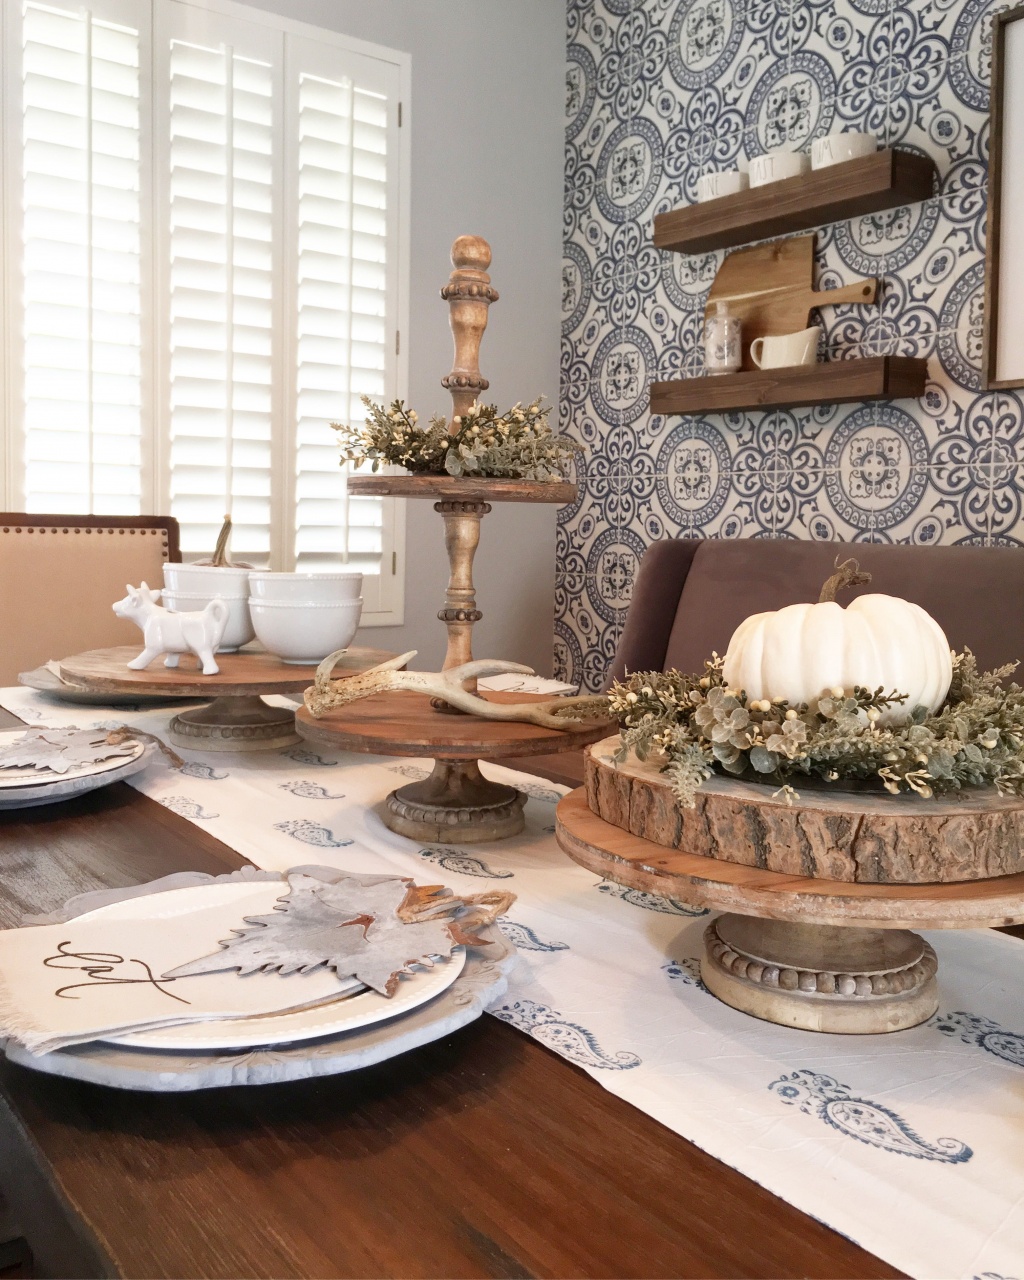 Fall Decor For Fireplace Mantel - Kitchen & Dining Room Table - HD Wallpaper 